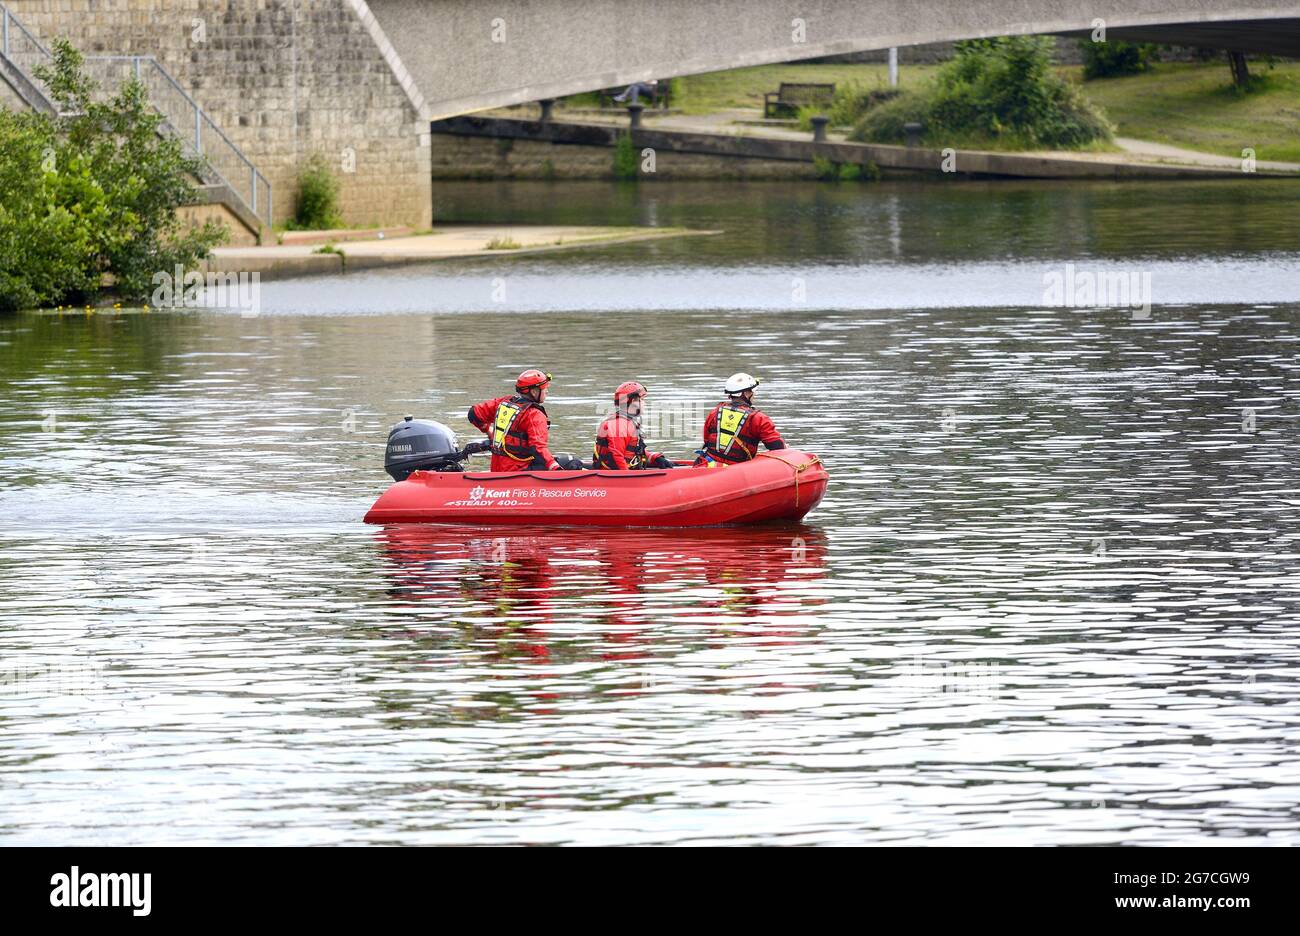 Maidstone, Kent, UK. Search and rescue operation looking for a man in the River Medway. Kent Fire and Rescue Pioner Steady 400 boat Stock Photo